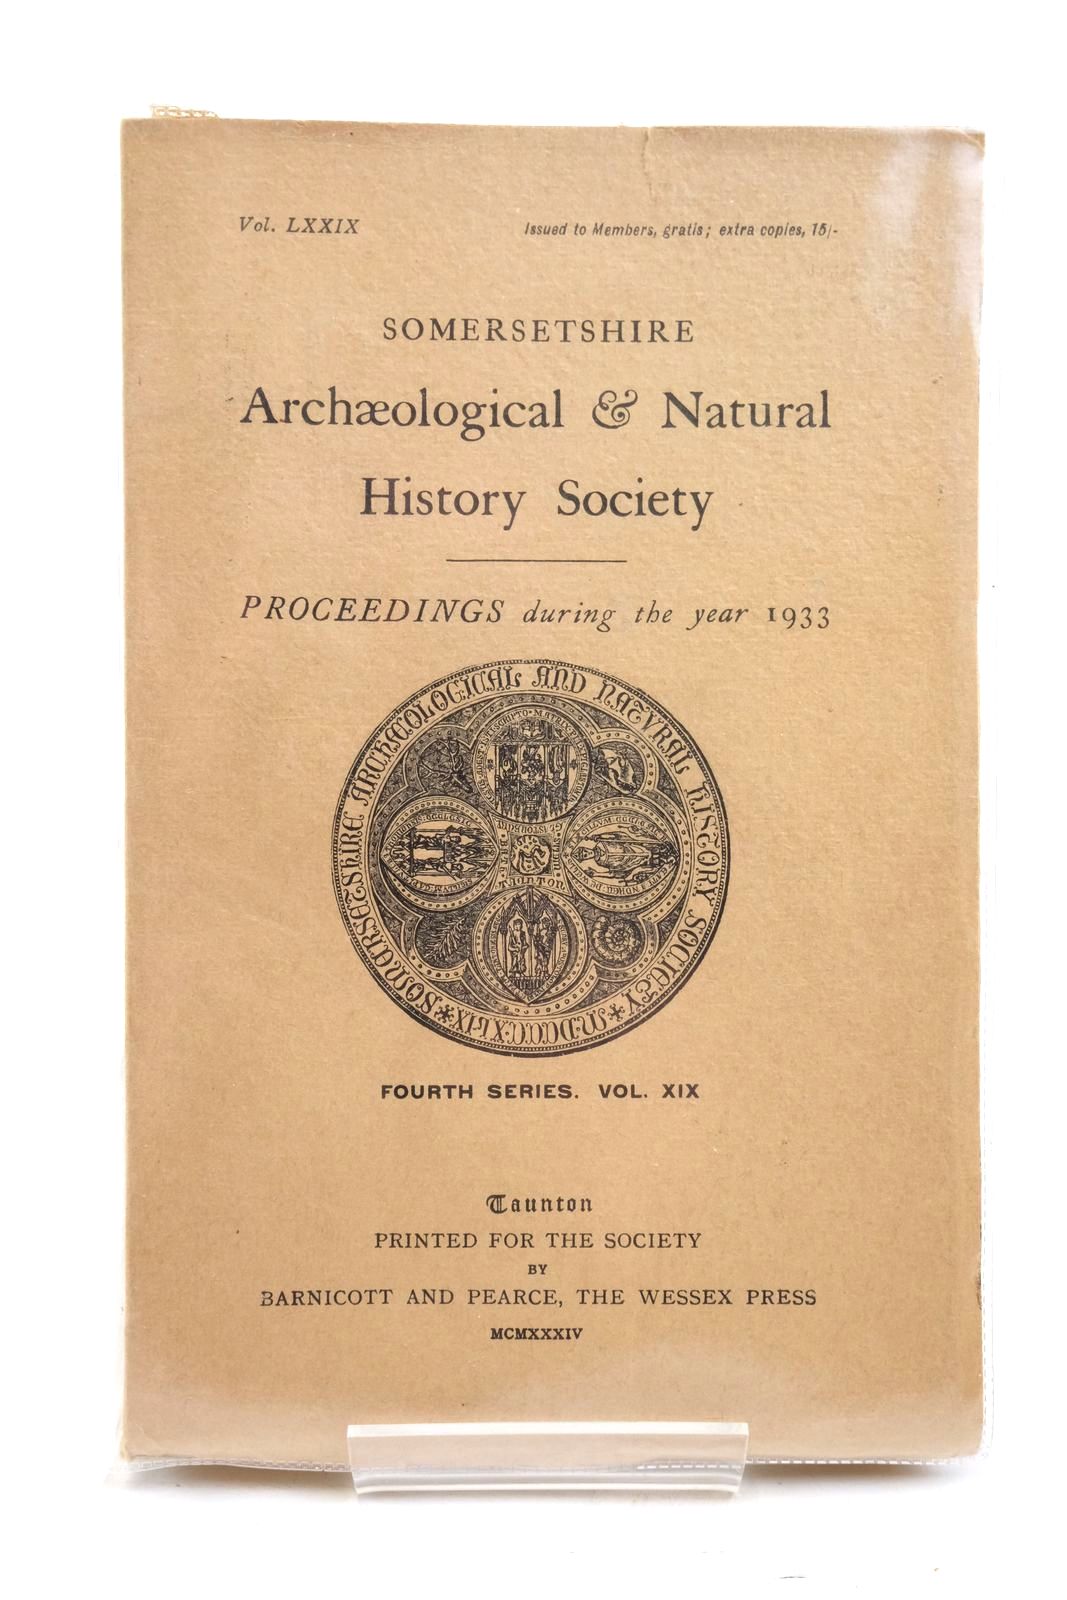 Photo of SOMERSETSHIRE ARCHAEOLOGICAL & NATURAL HISTORY SOCIETY VOL LXXIX published by Somersetshire Archaeological Natural History Society (STOCK CODE: 2137655)  for sale by Stella & Rose's Books